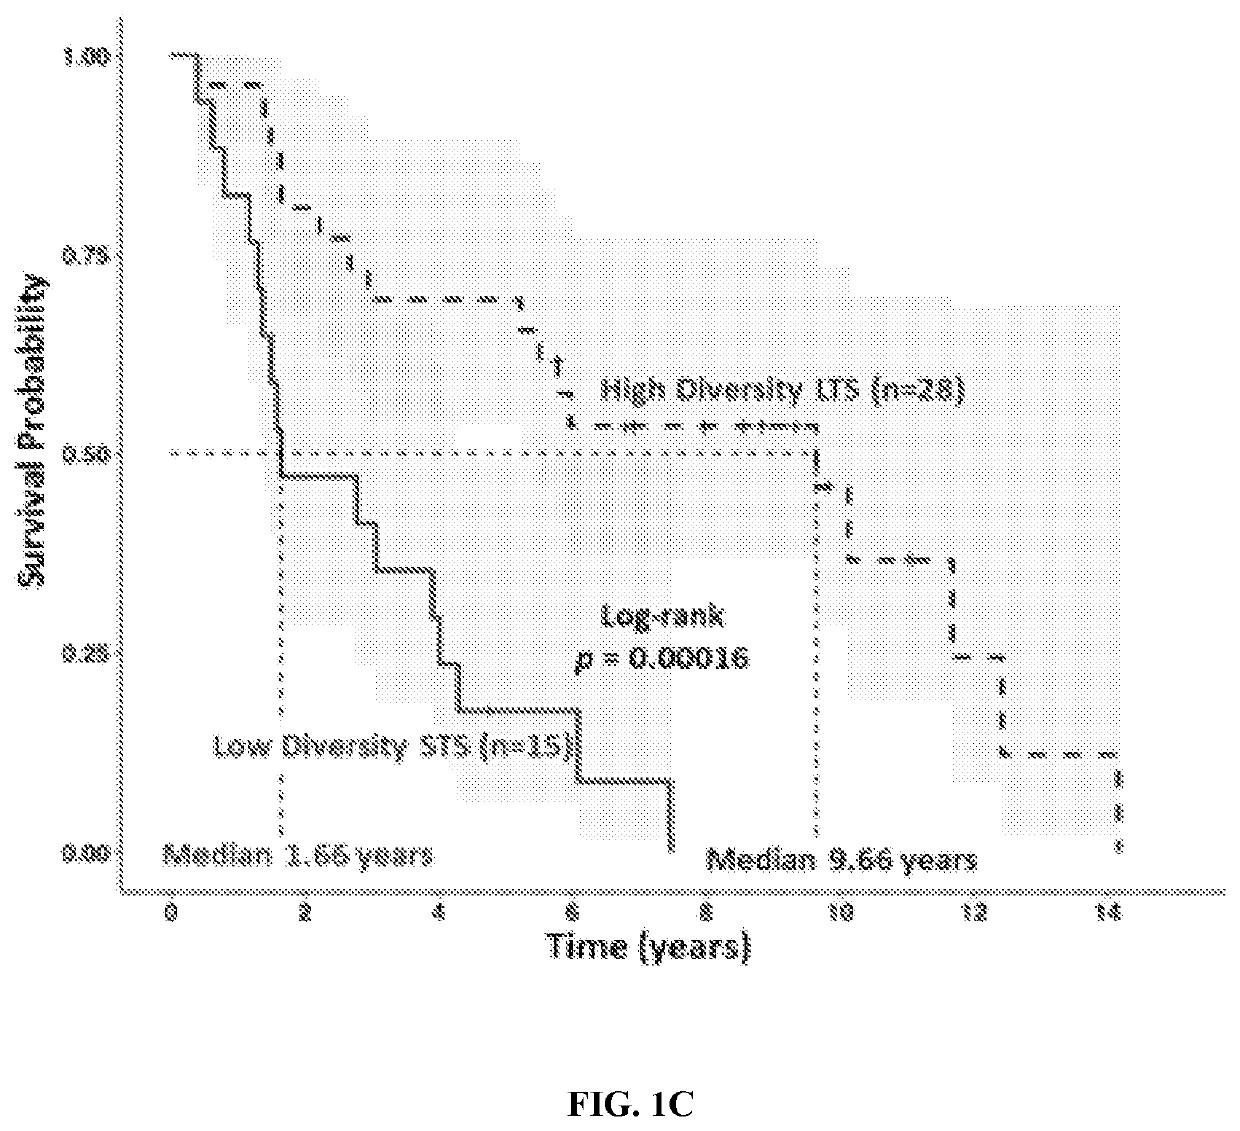 Tumor microbiome signature and therapeutic use of fecal microbiota transplantation on pancreatic cancer patients